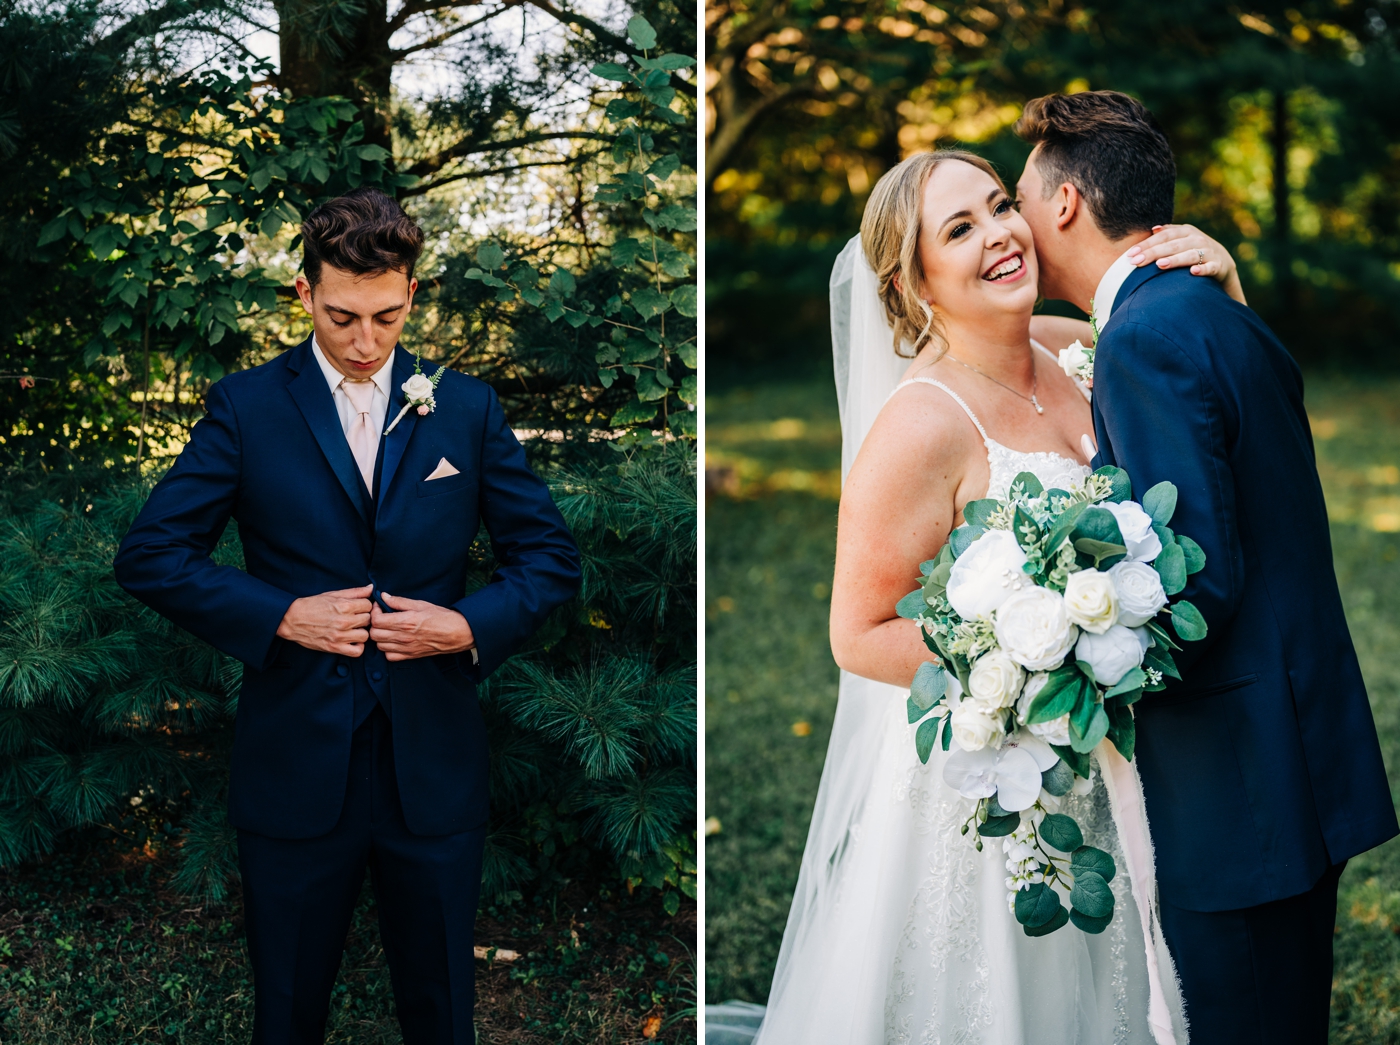 Bride and groom portraits in Greenwood, Indiana